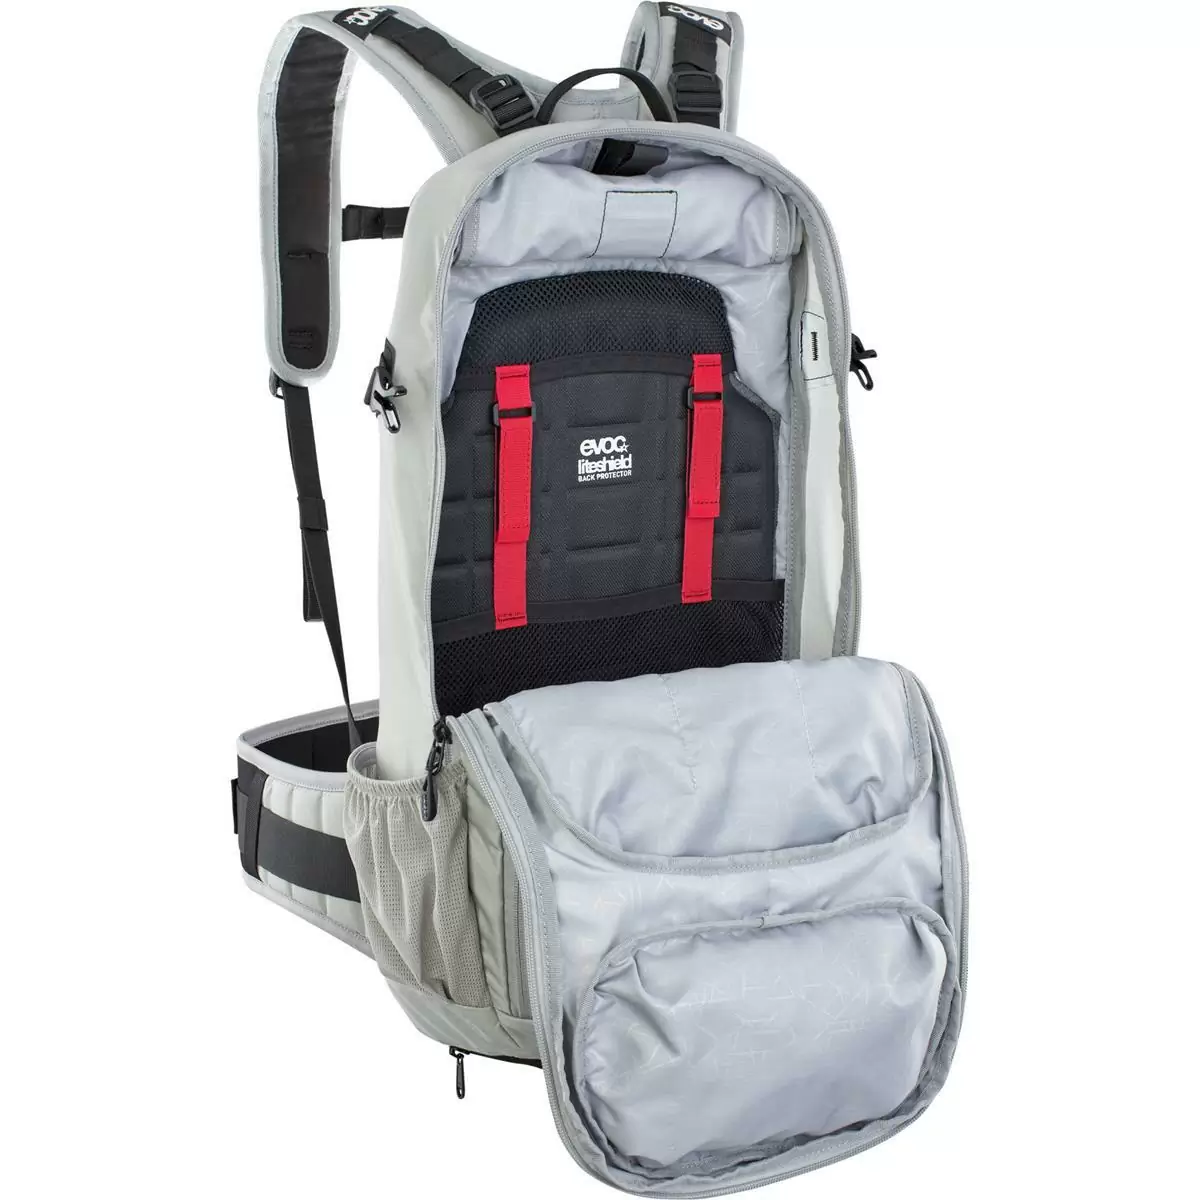 FR enduro backpack with Stone Gray Back Protector 16 Liters Size S #3